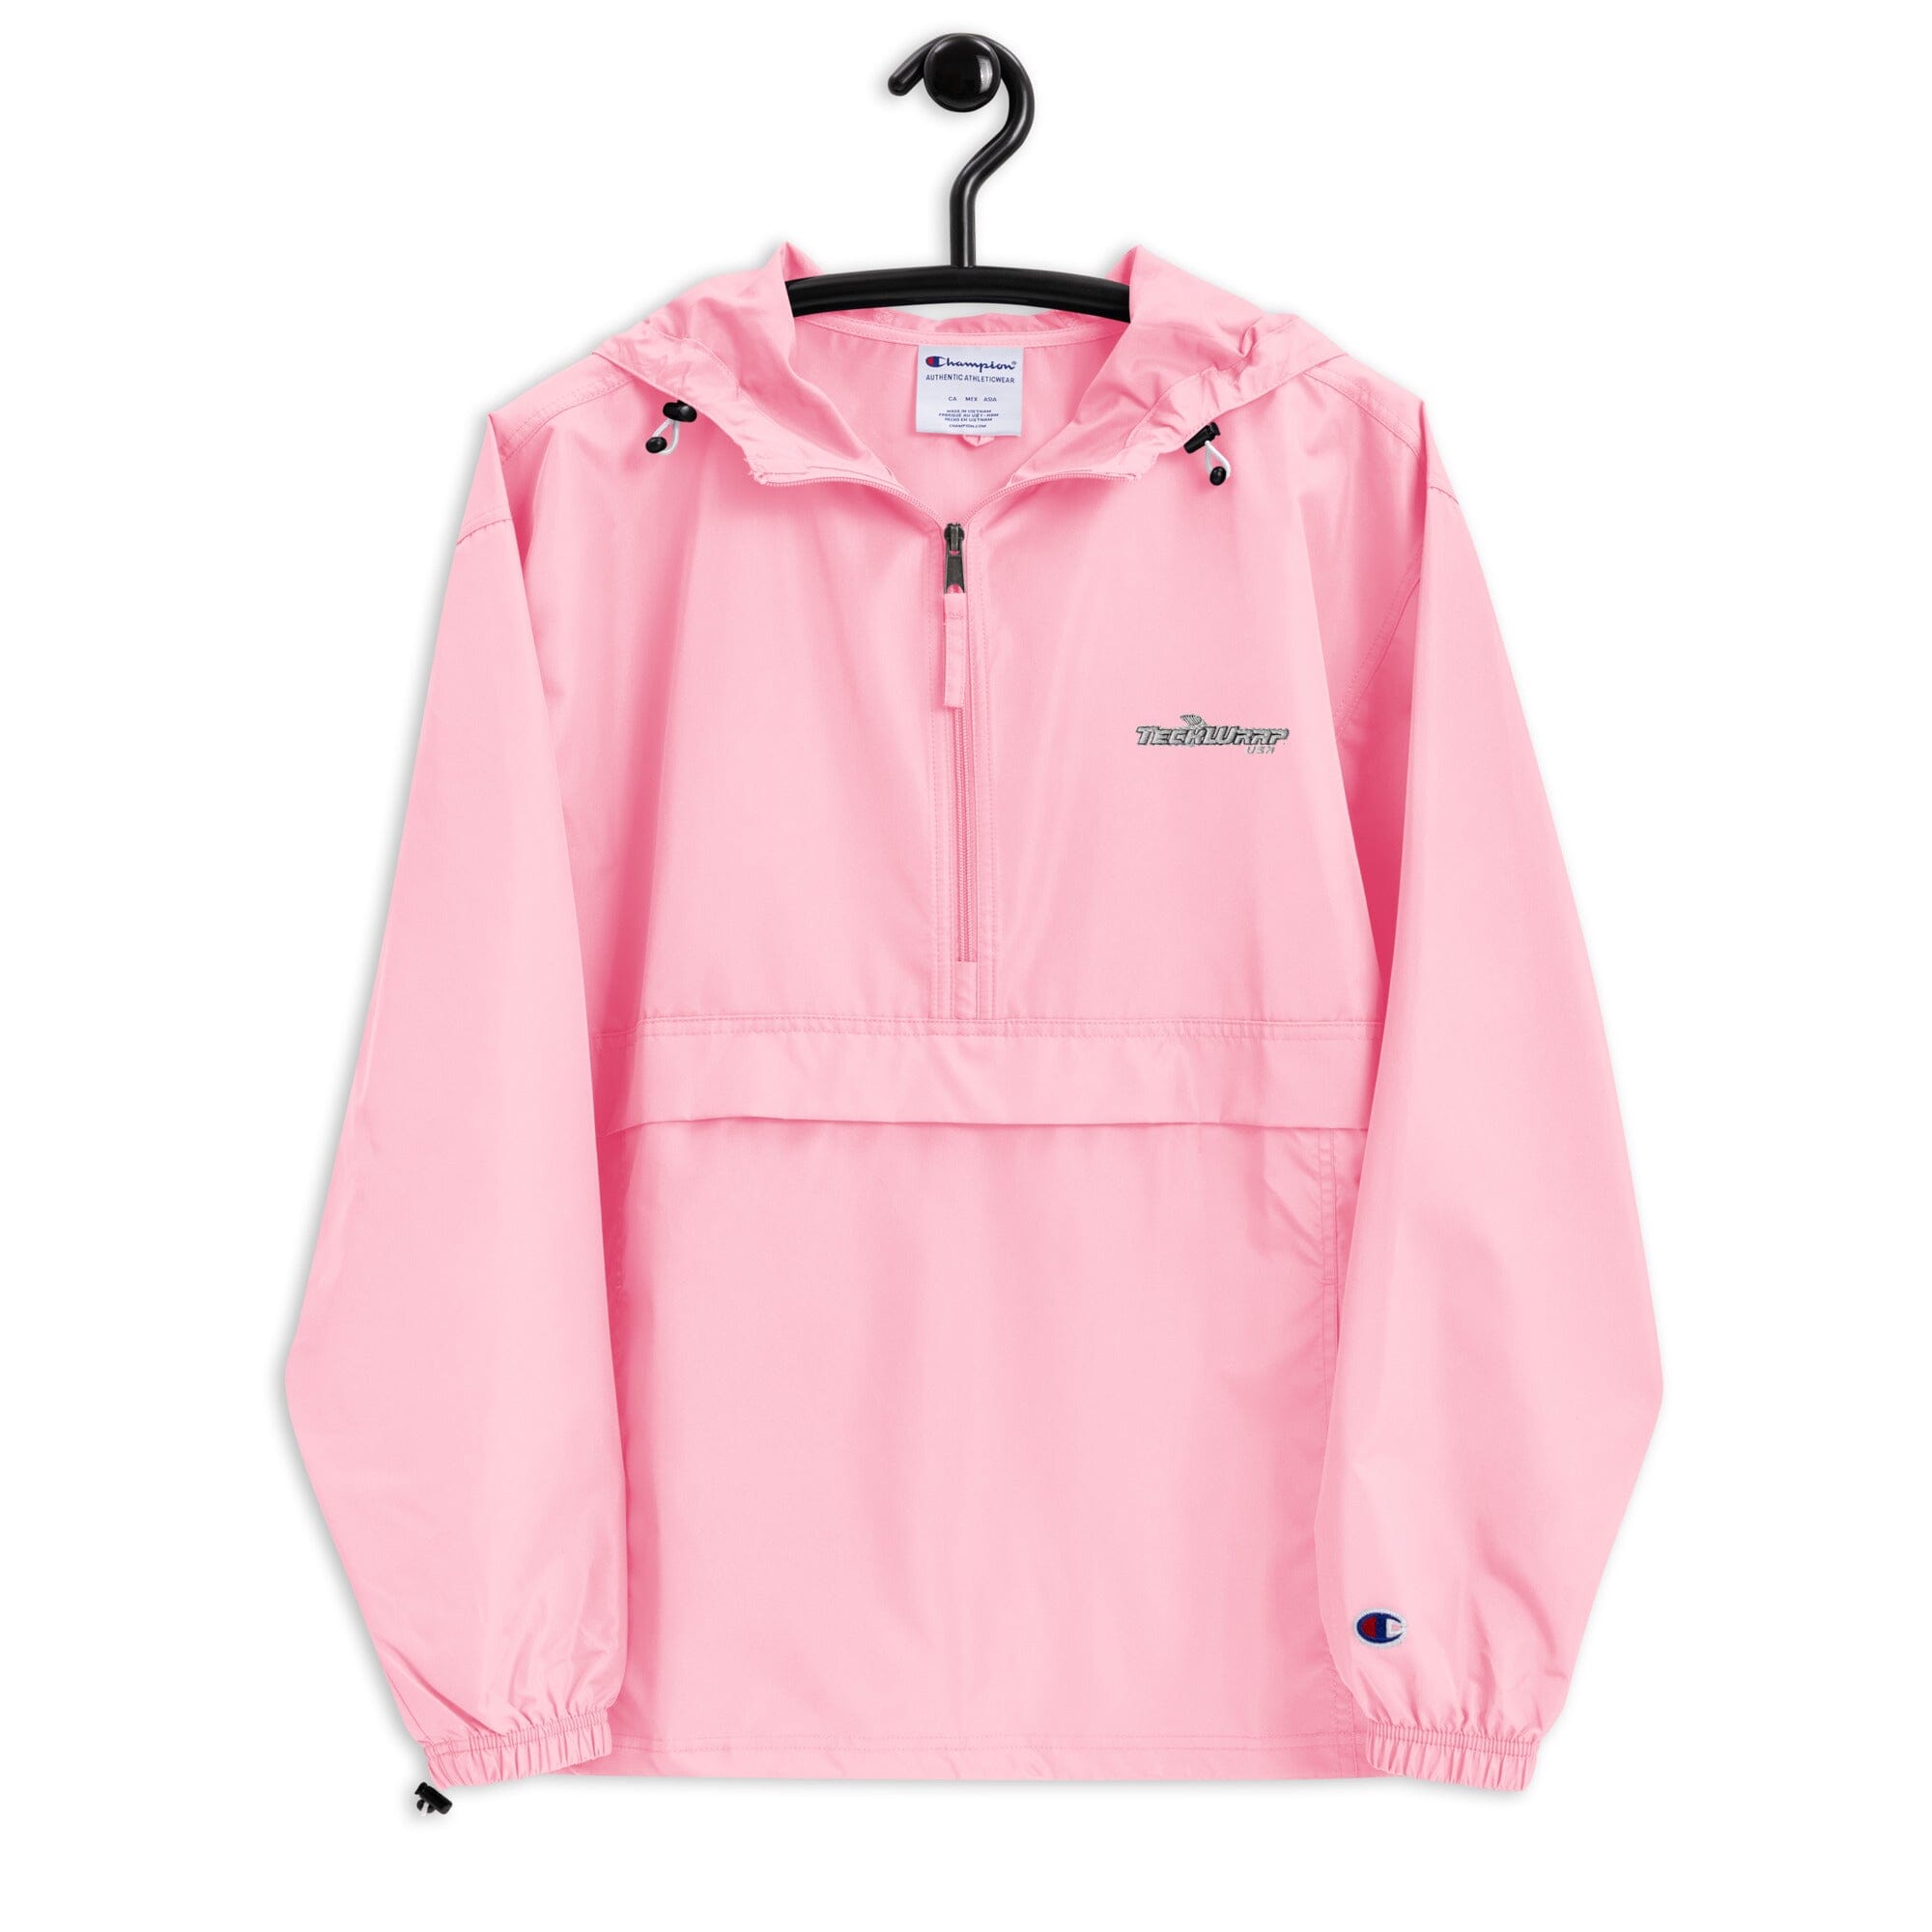 Embroidered Champion Packable Jacket Teckwrap USA Pink Candy S 